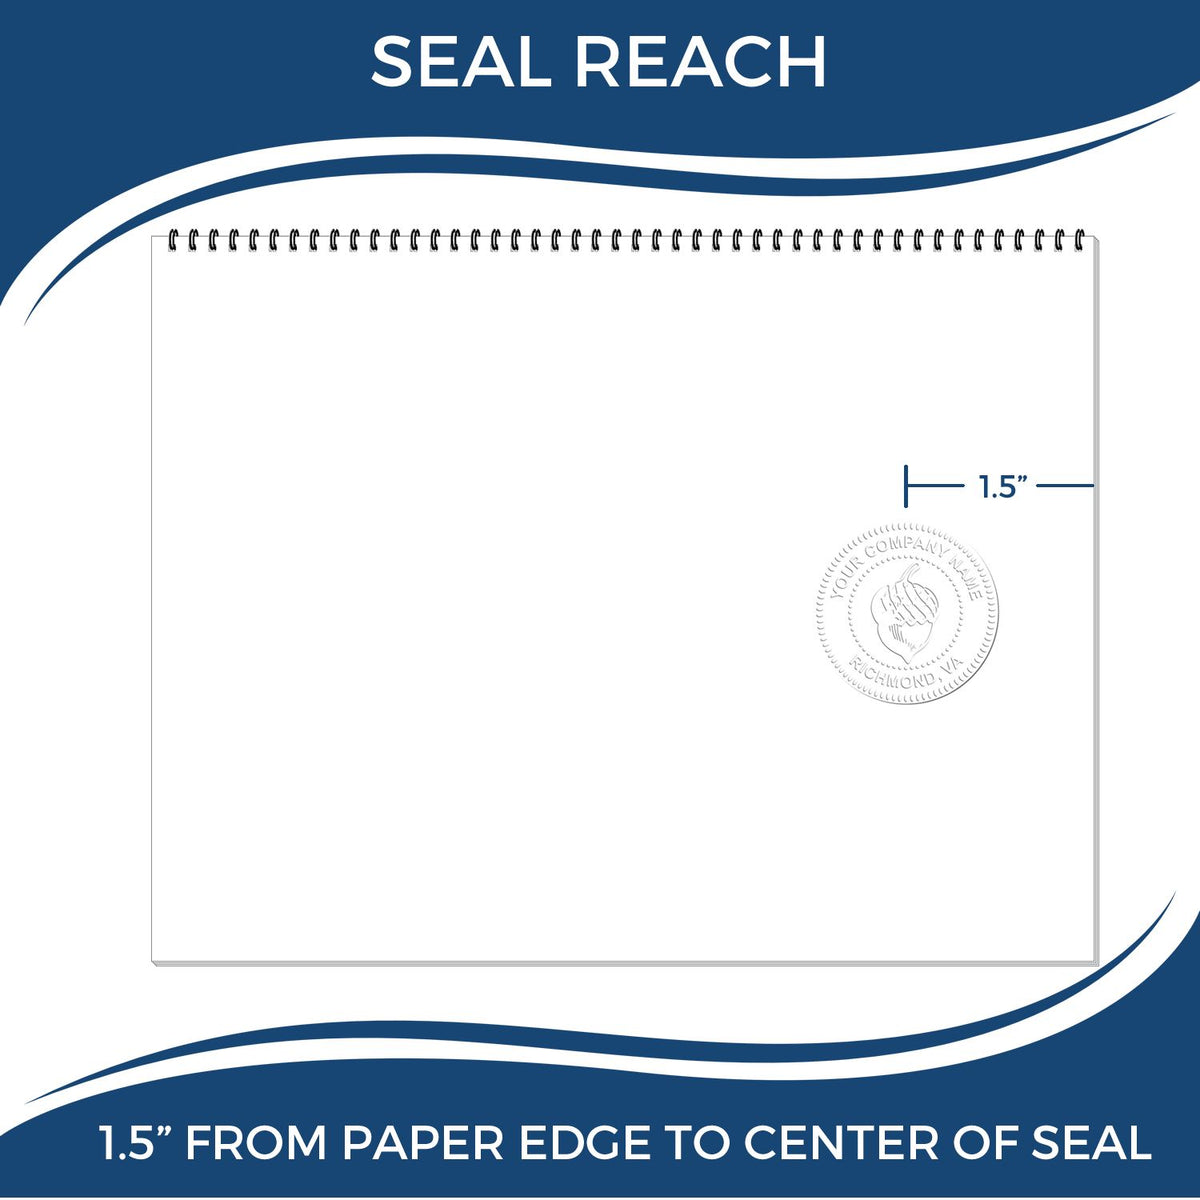 An infographic showing the seal reach which is represented by a ruler and a miniature seal image of the Handheld New Hampshire Architect Seal Embosser